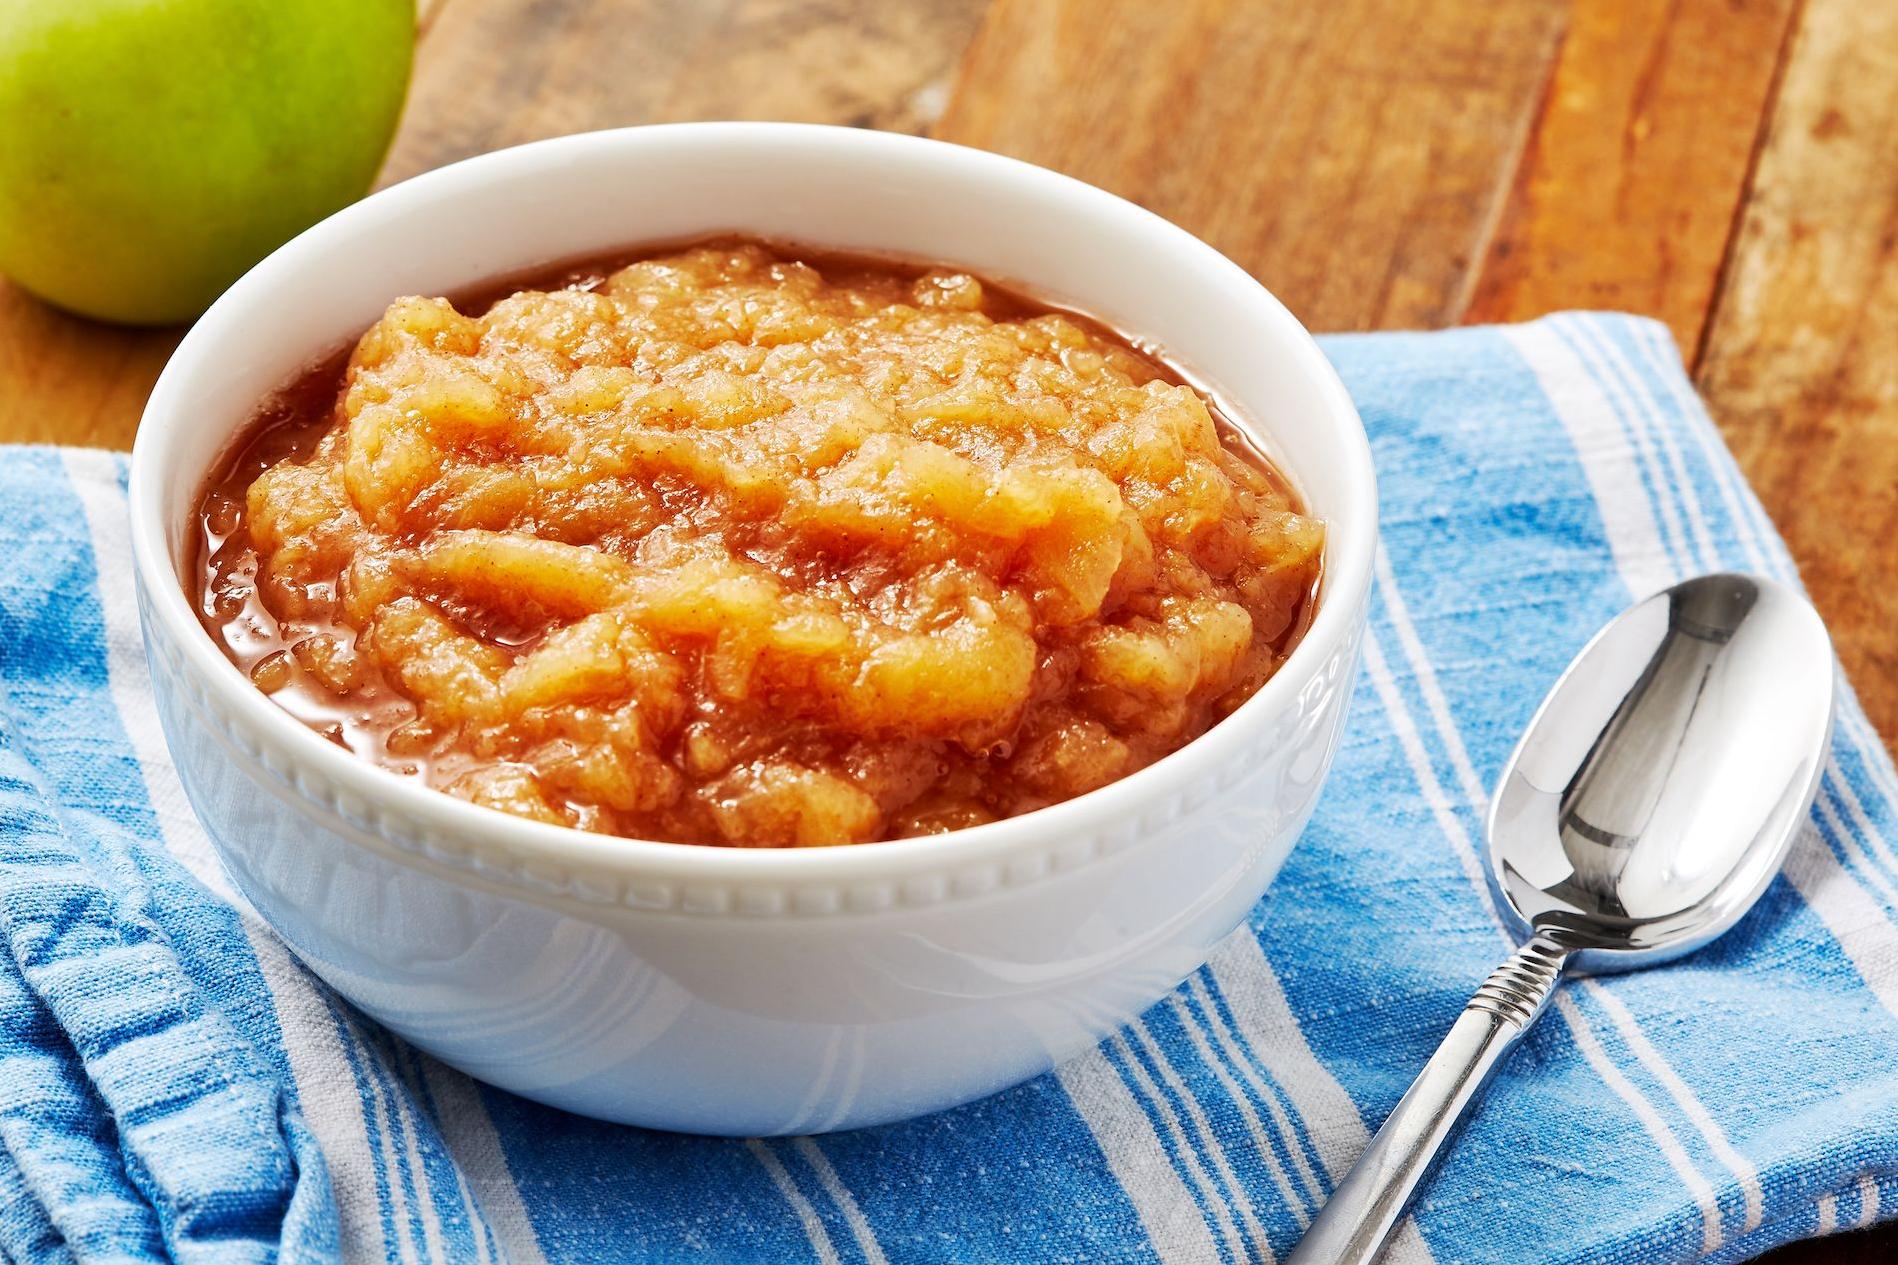  Make your Instant Pot work its magic on this applesauce recipe.